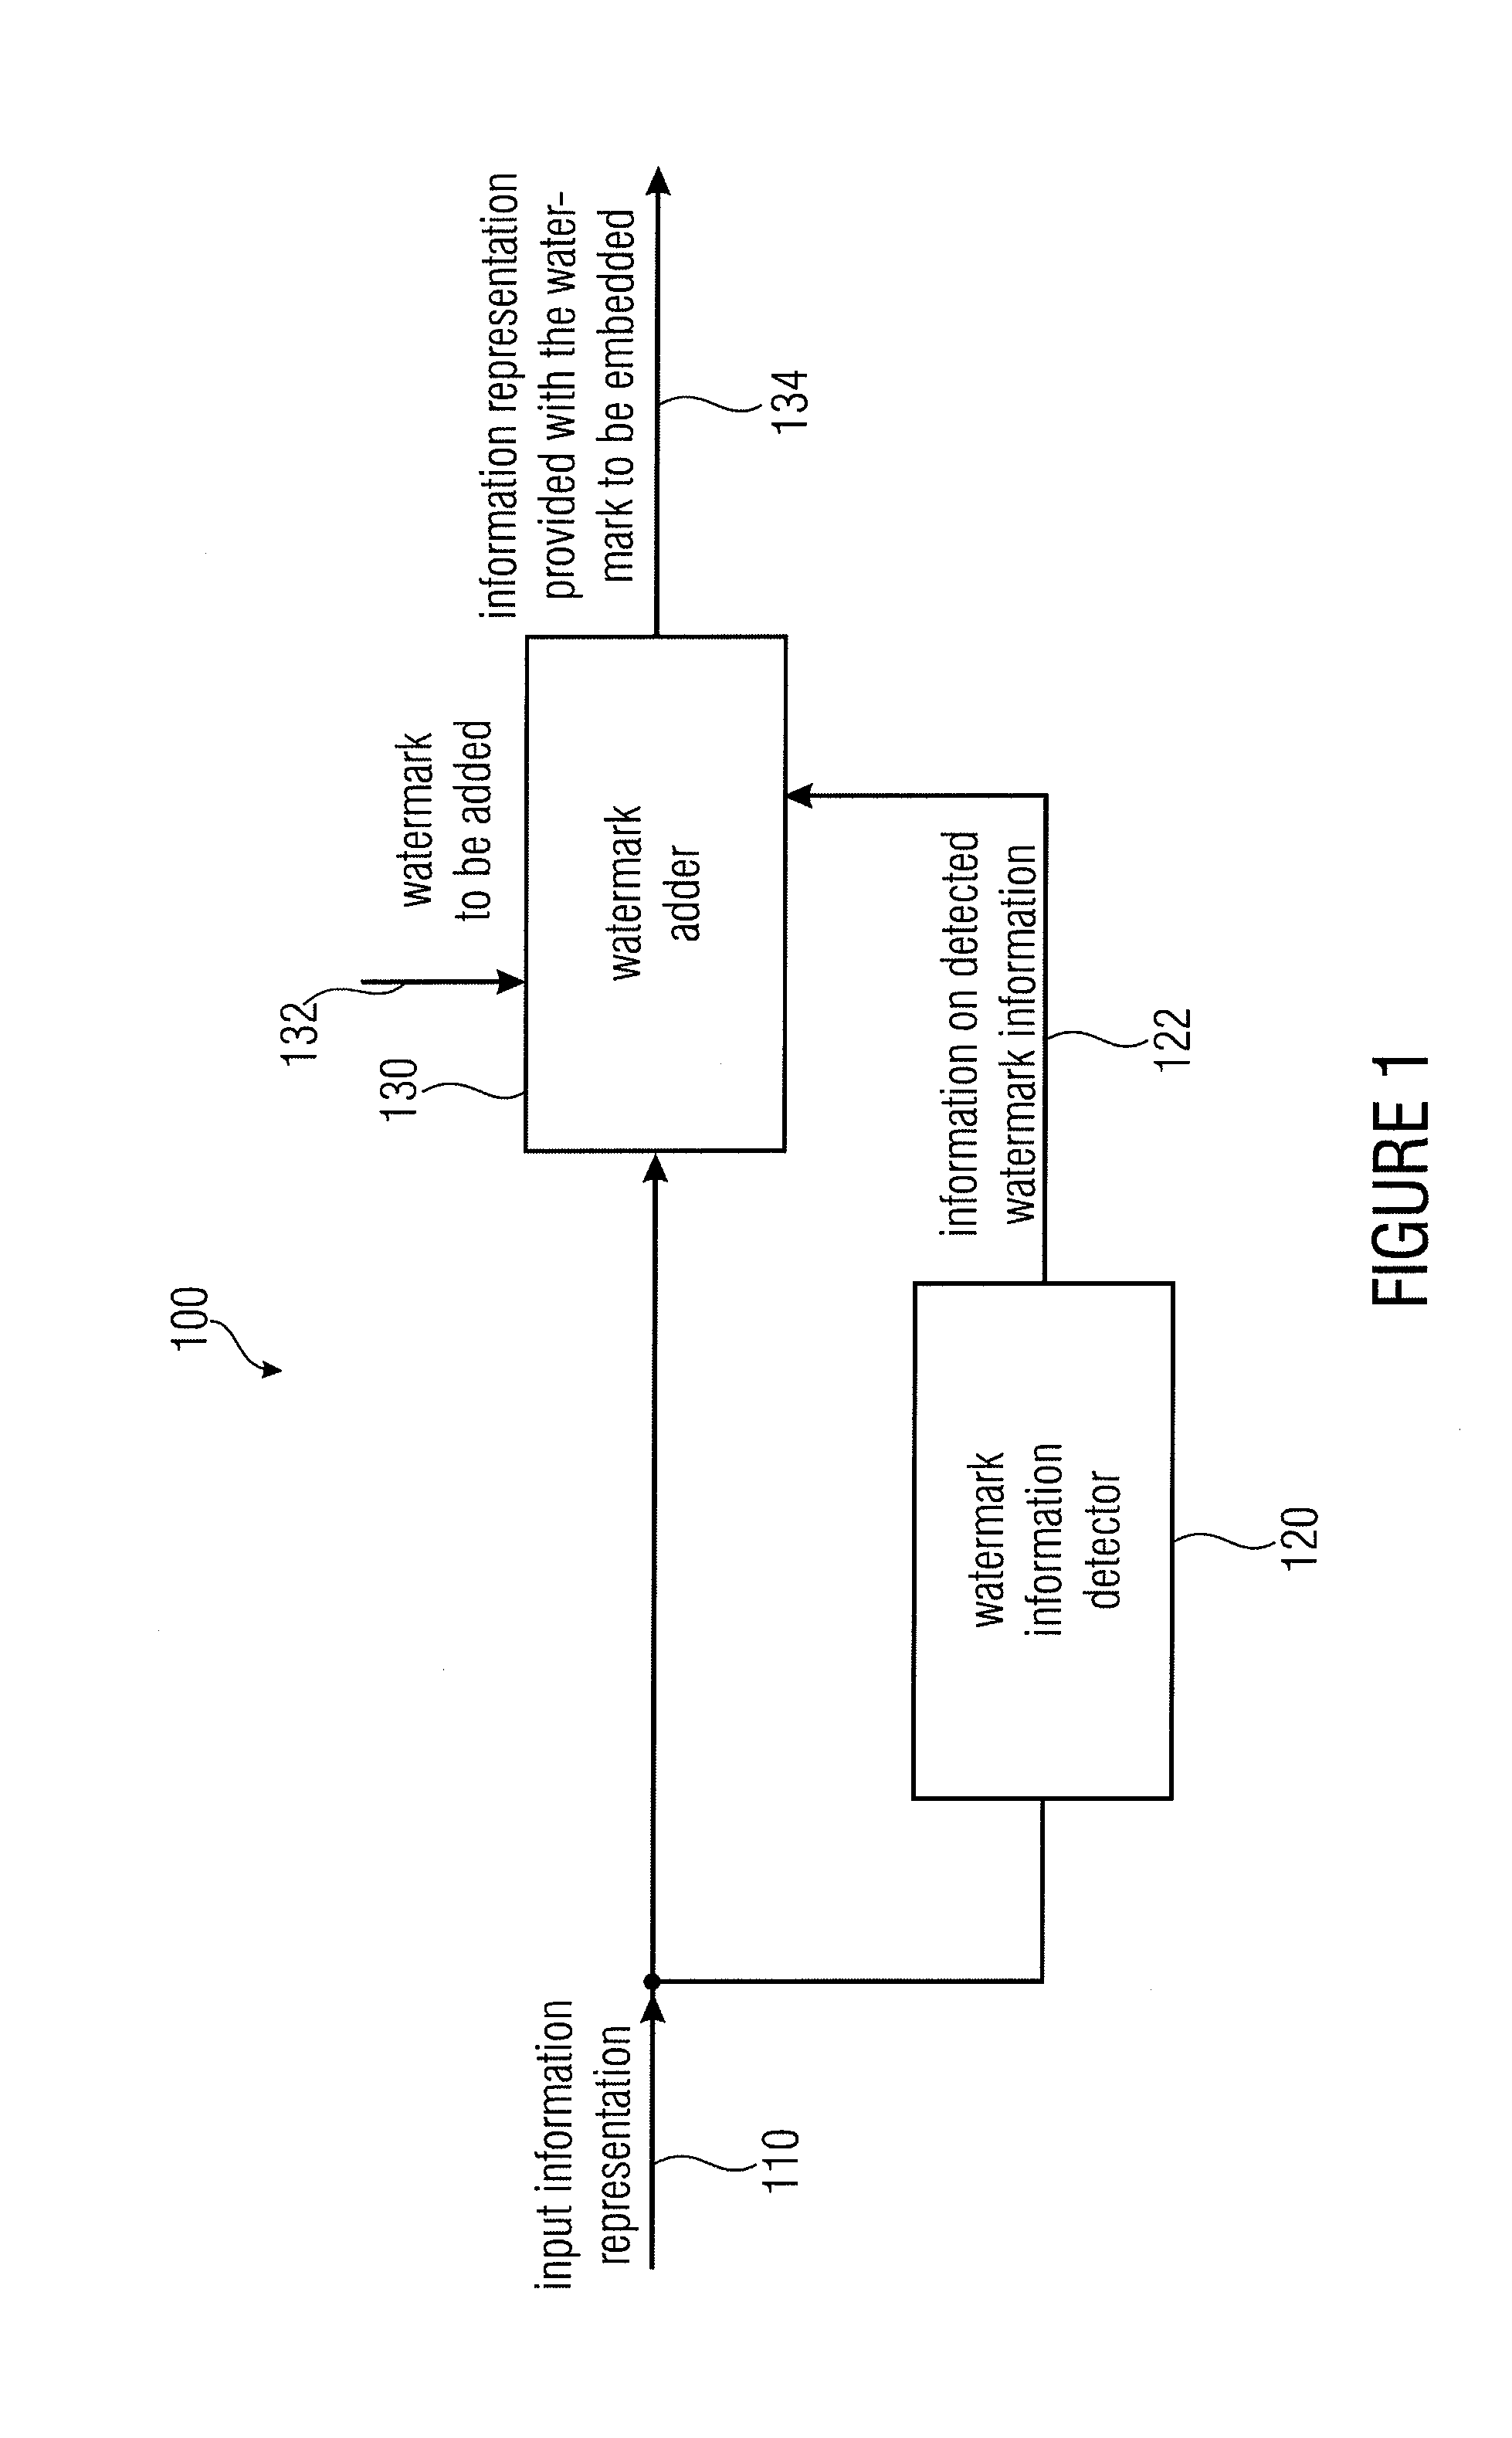 Embedder for embedding a watermark into an information representation, detector for detecting a watermark in an information representation, method and computer program and information signal